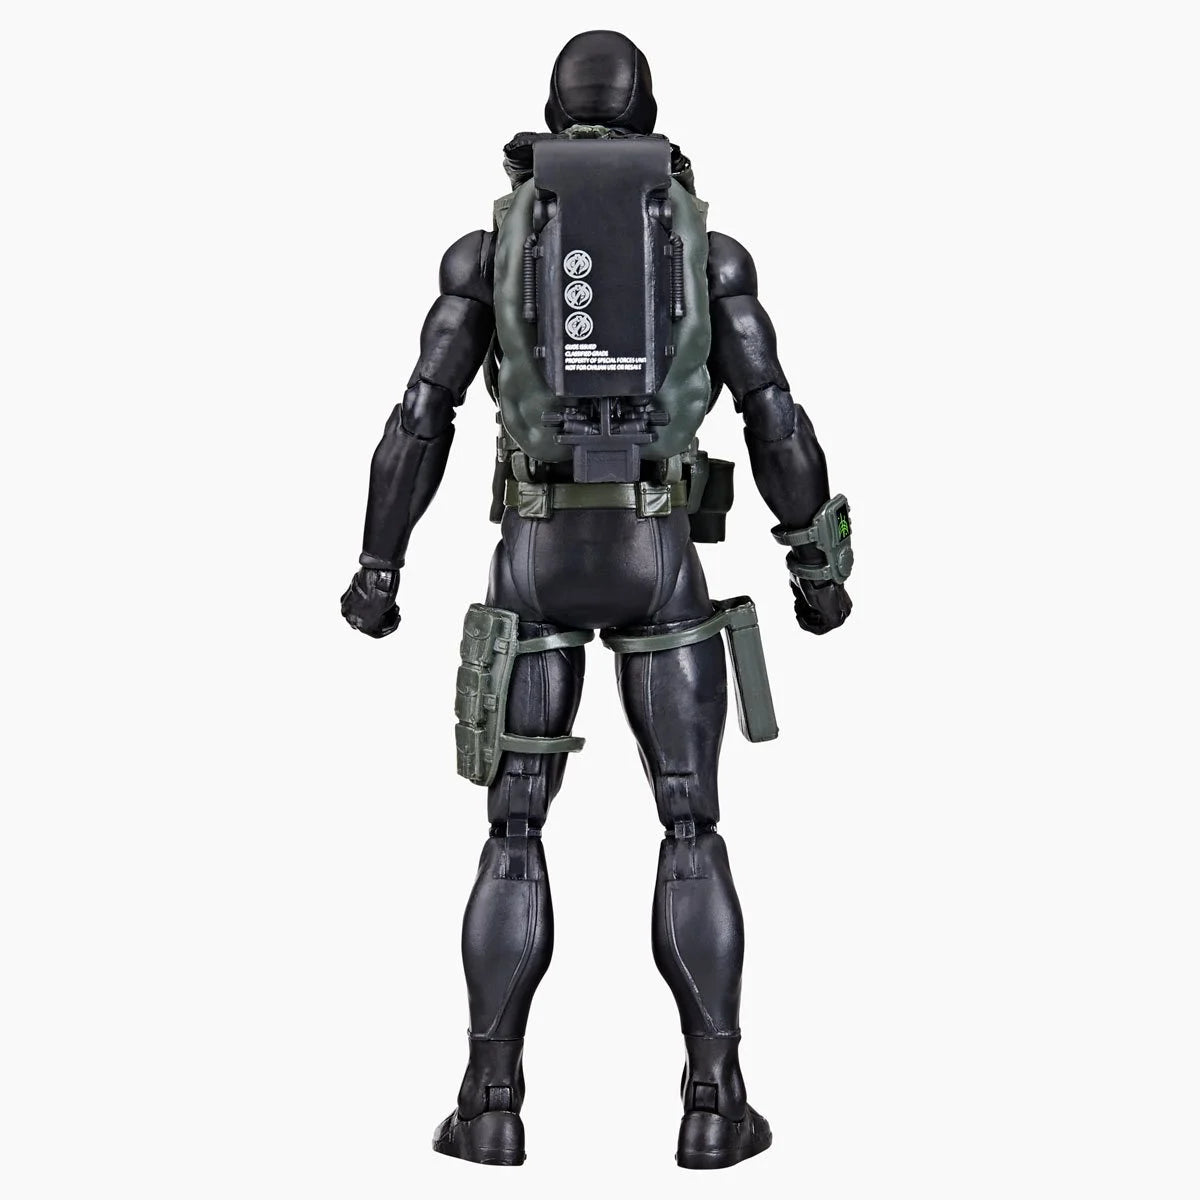 G.I. Joe Classified Series 60th Anniversary Action Sailor - Recon Diver Action Figure